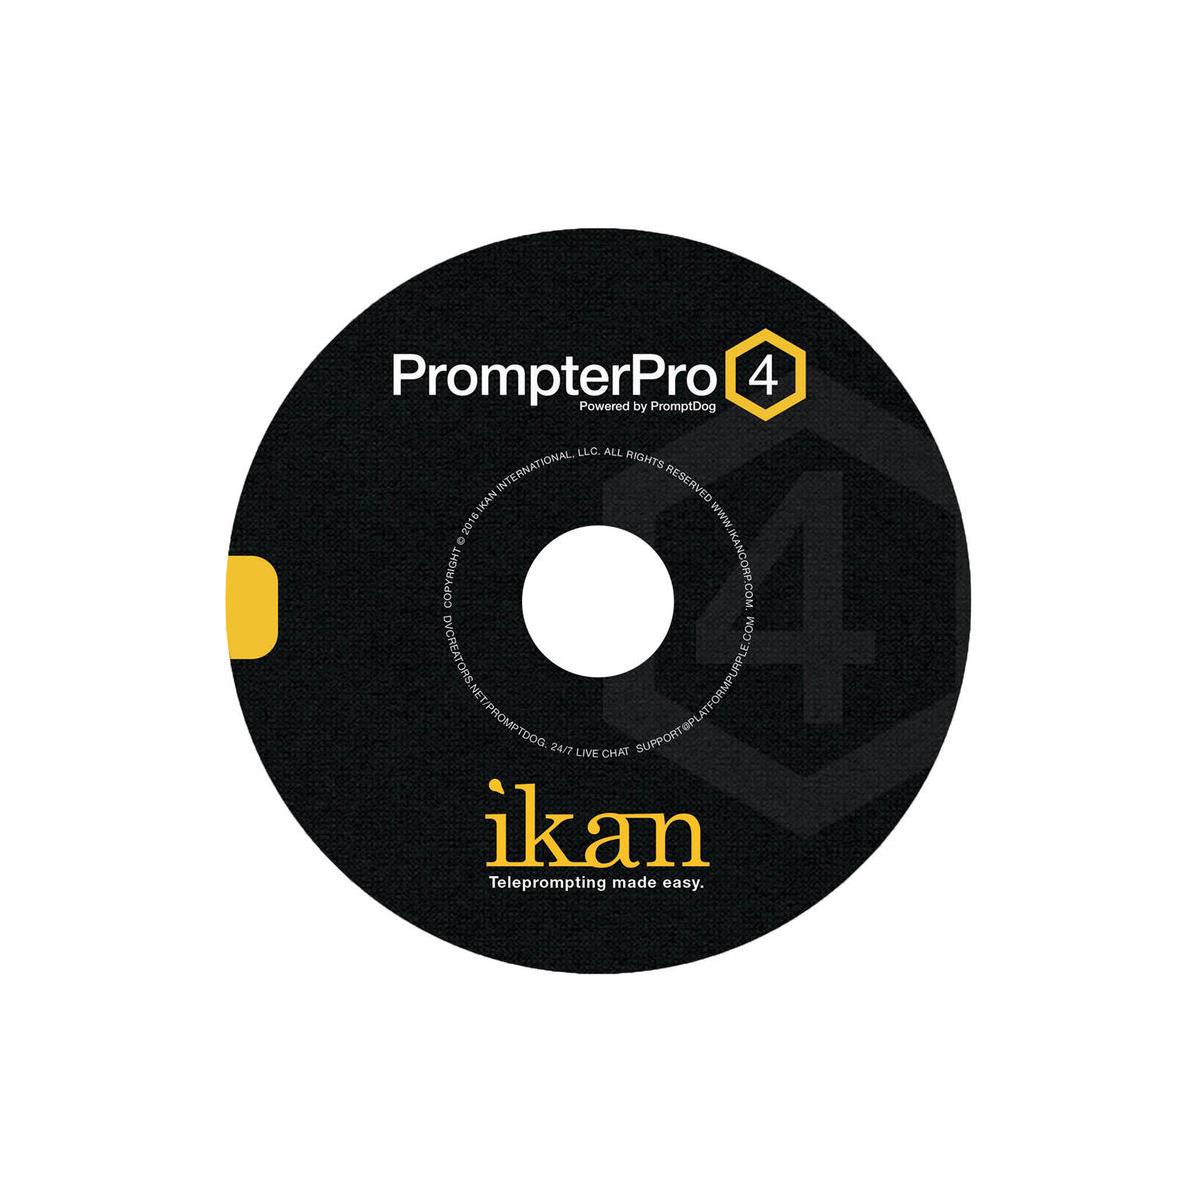 Image of Ikan PrompterPro 4 Teleprompting Software for PC and Mac